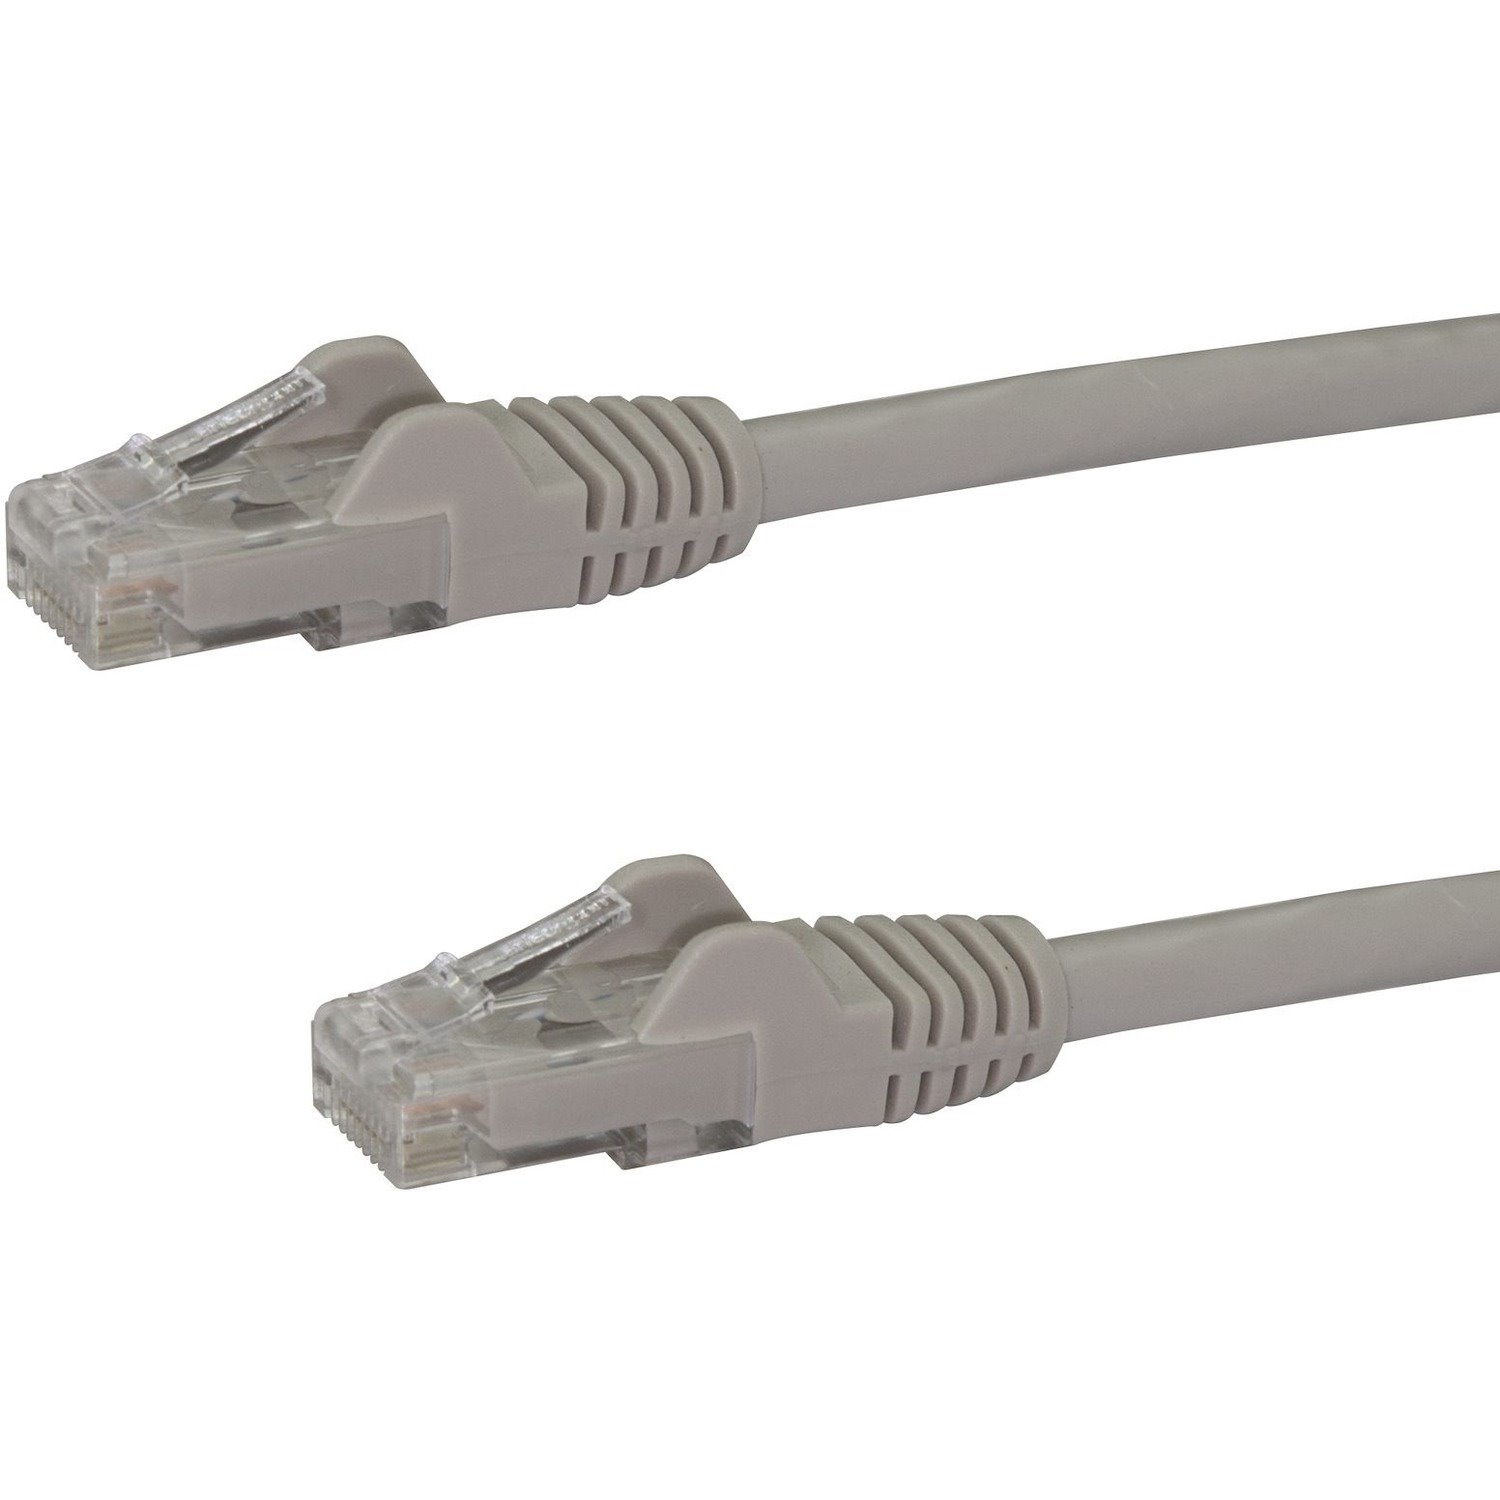 StarTech.com 3m CAT6 Ethernet Cable - Grey Snagless Gigabit - 100W PoE UTP 650MHz Category 6 Patch Cord UL Certified Wiring/TIA